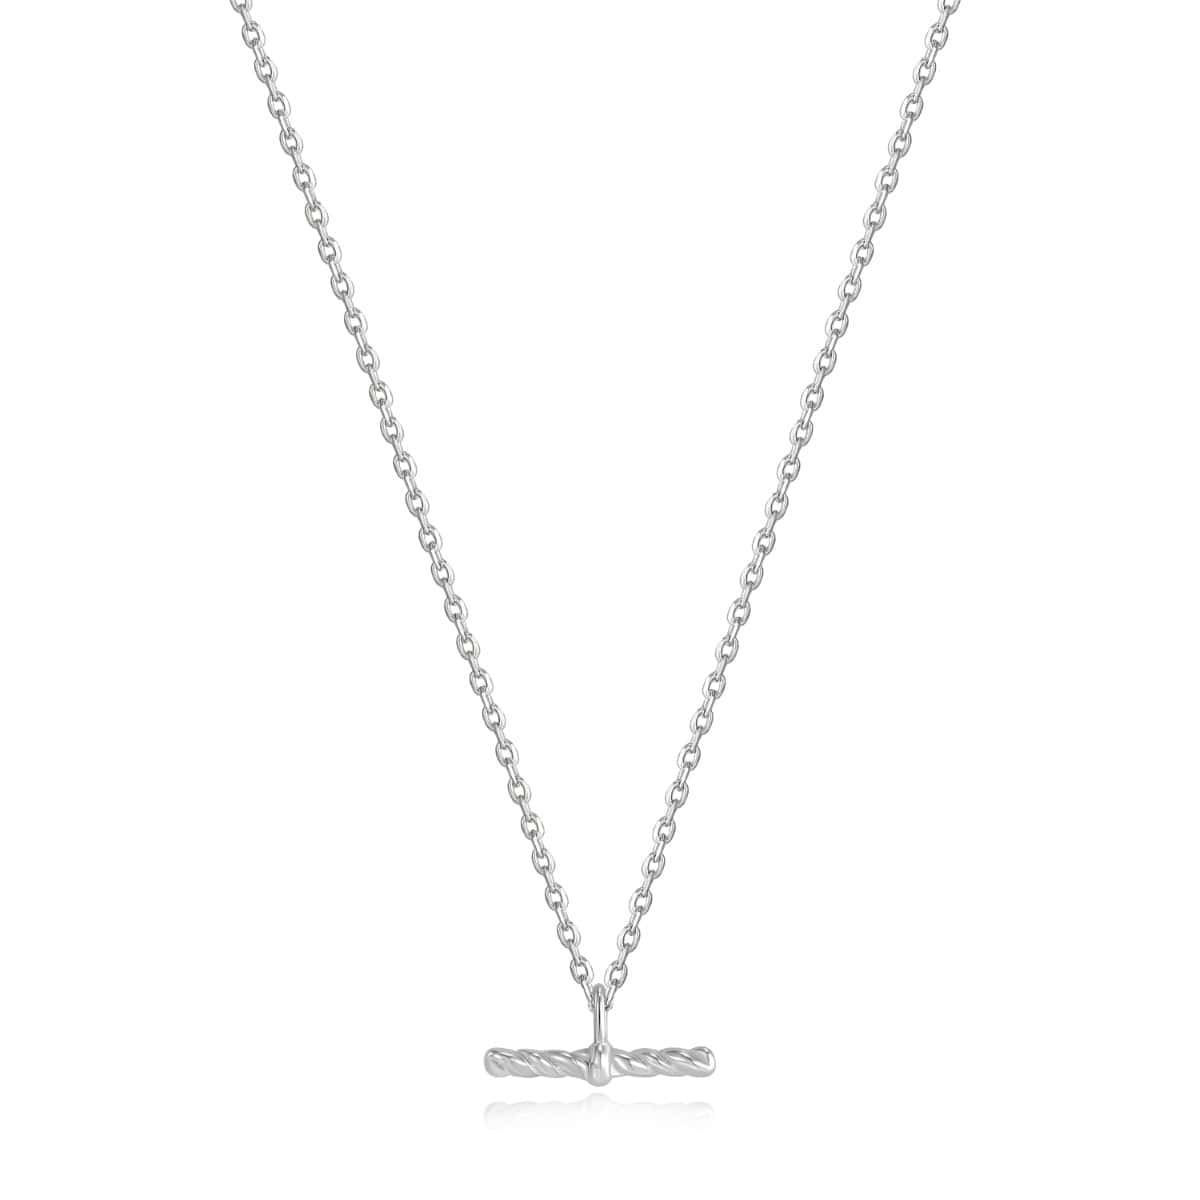 Ania Haie Rope T-Bar Necklace - Silver - N036-01H